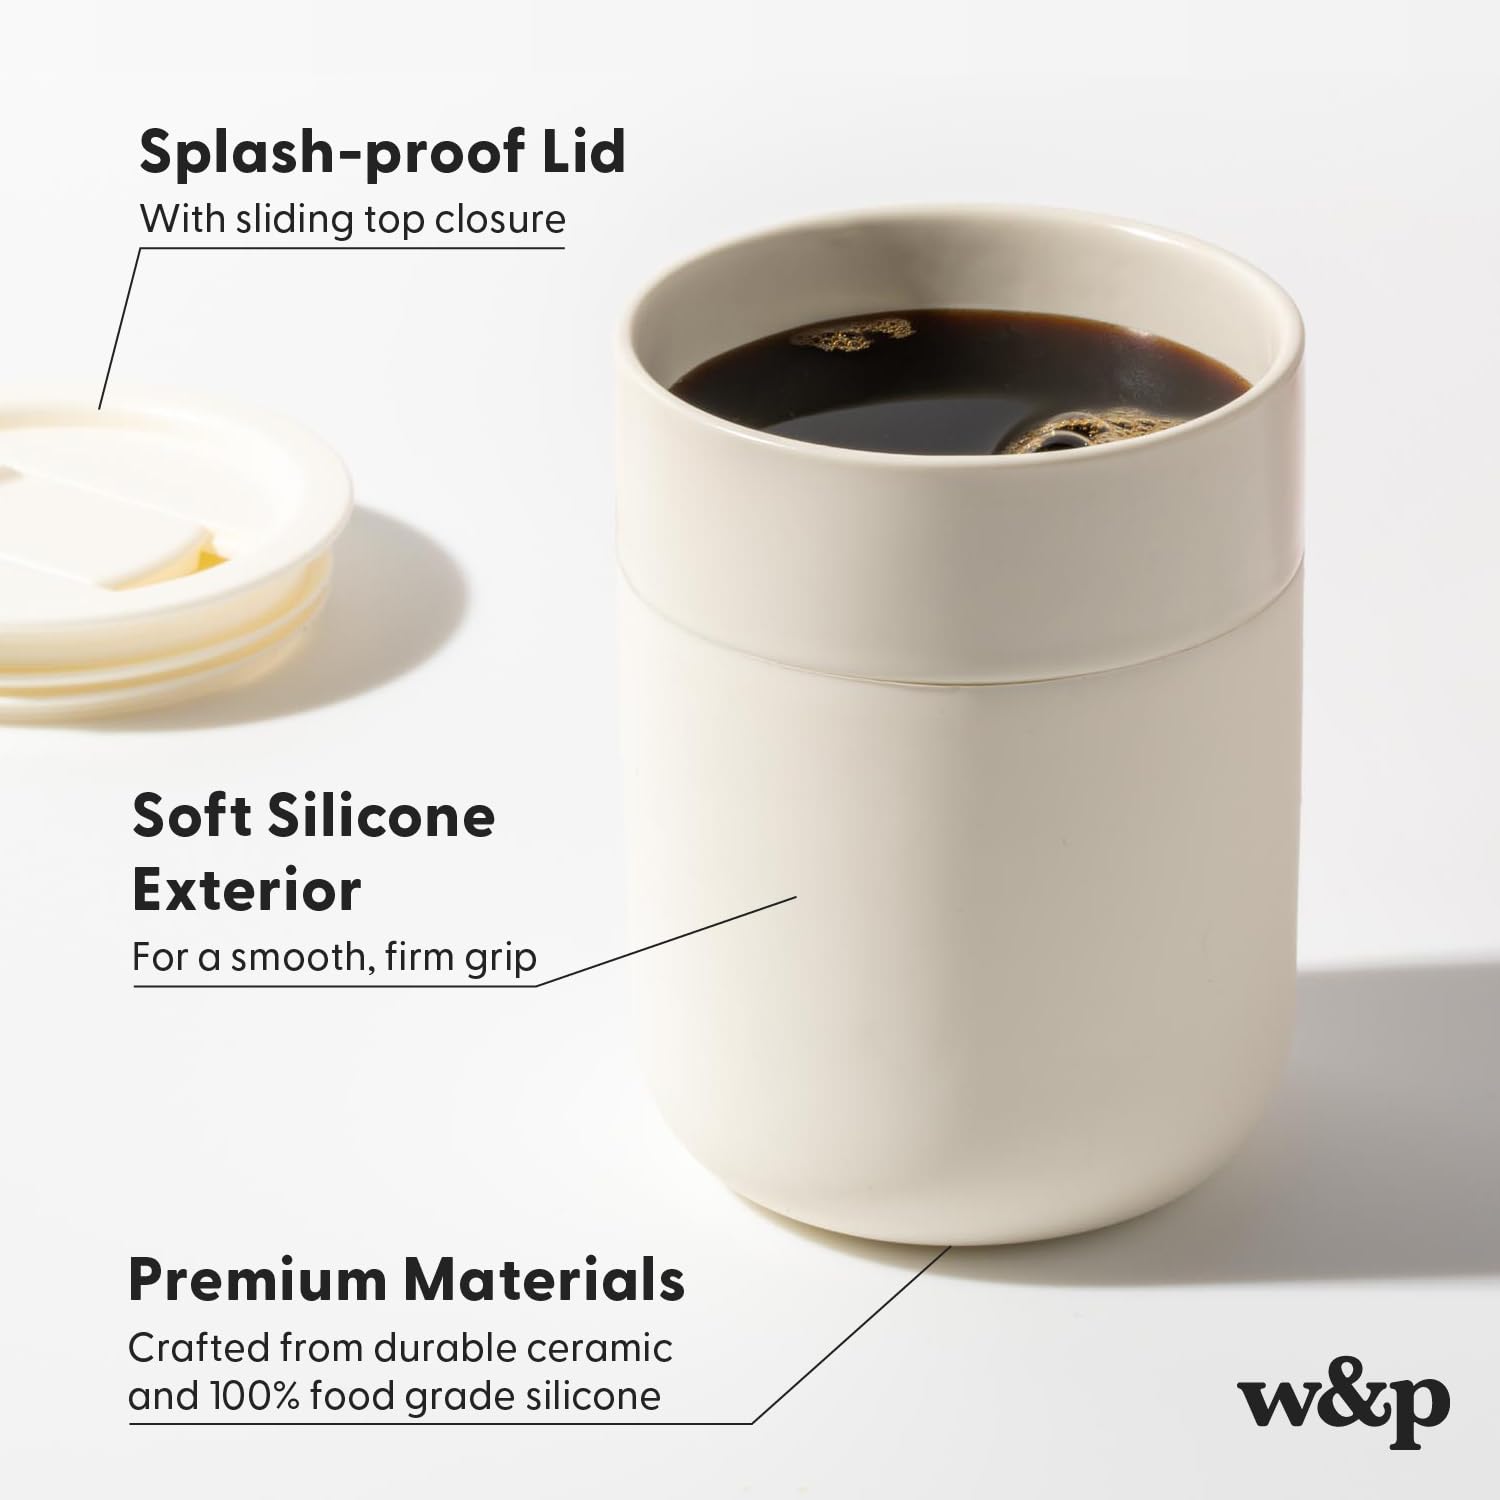 W&P Porter Ceramic Mug w/ Protective Silicone Sleeve, Cream 16 Ounces | On-the-Go | Reusable Cup for Coffee or Tea | Portable | Dishwasher Safe